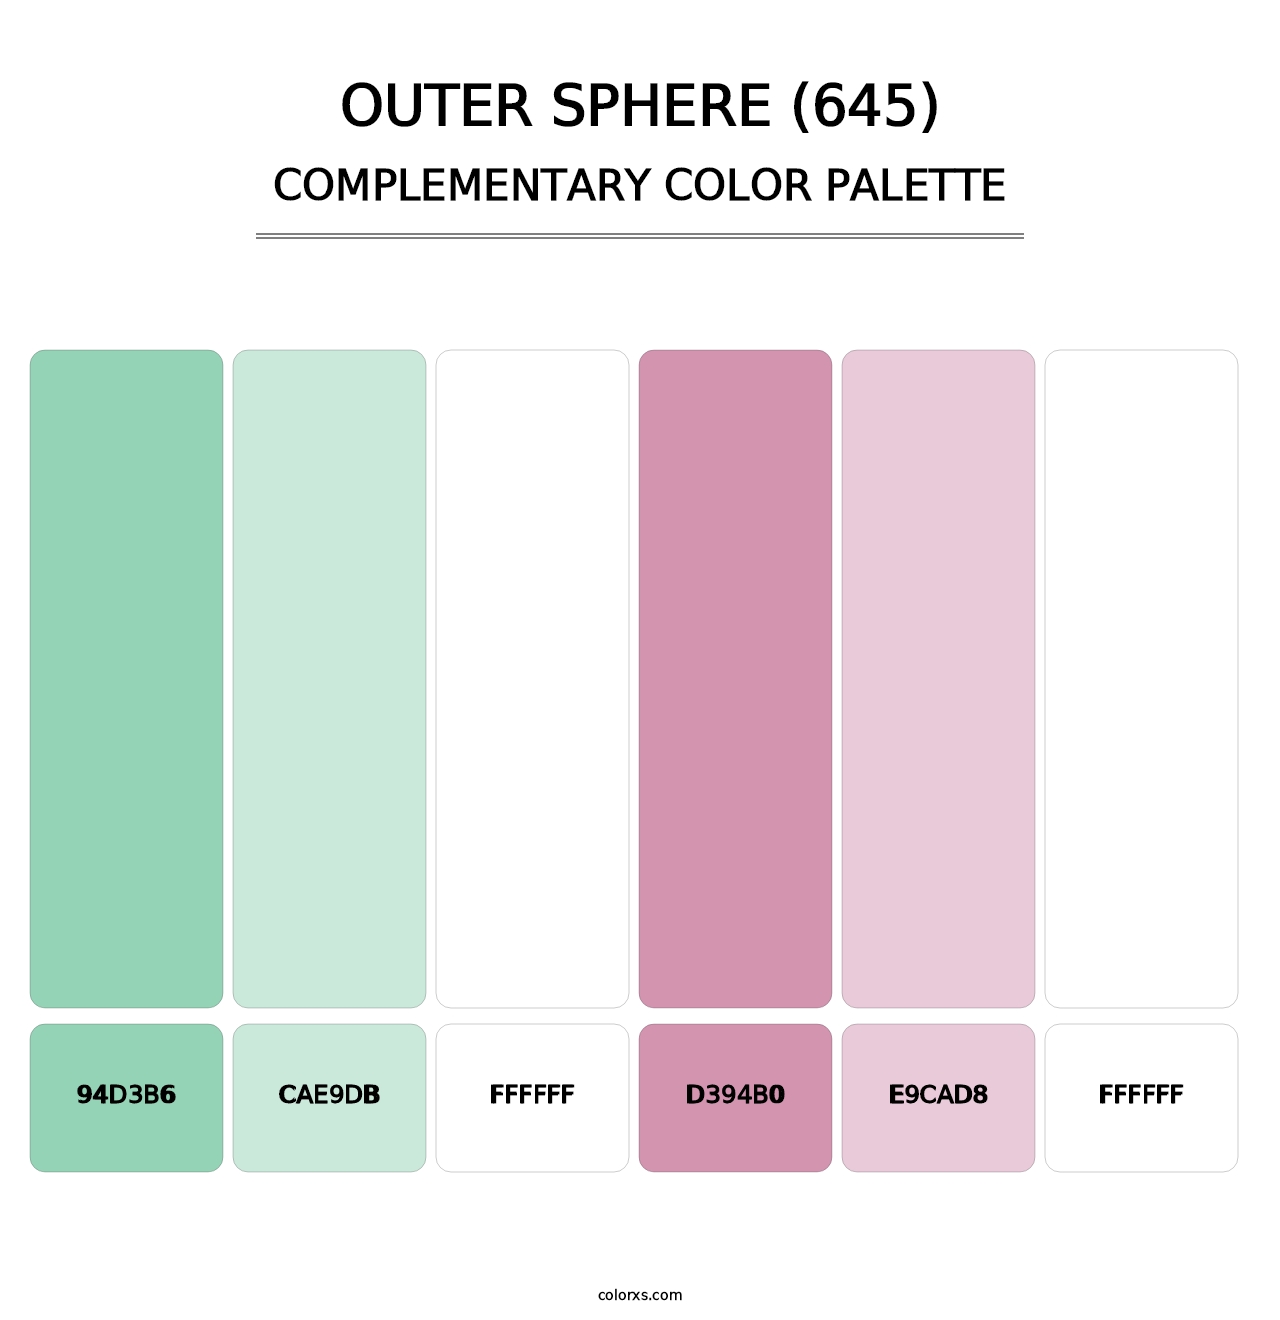 Outer Sphere (645) - Complementary Color Palette